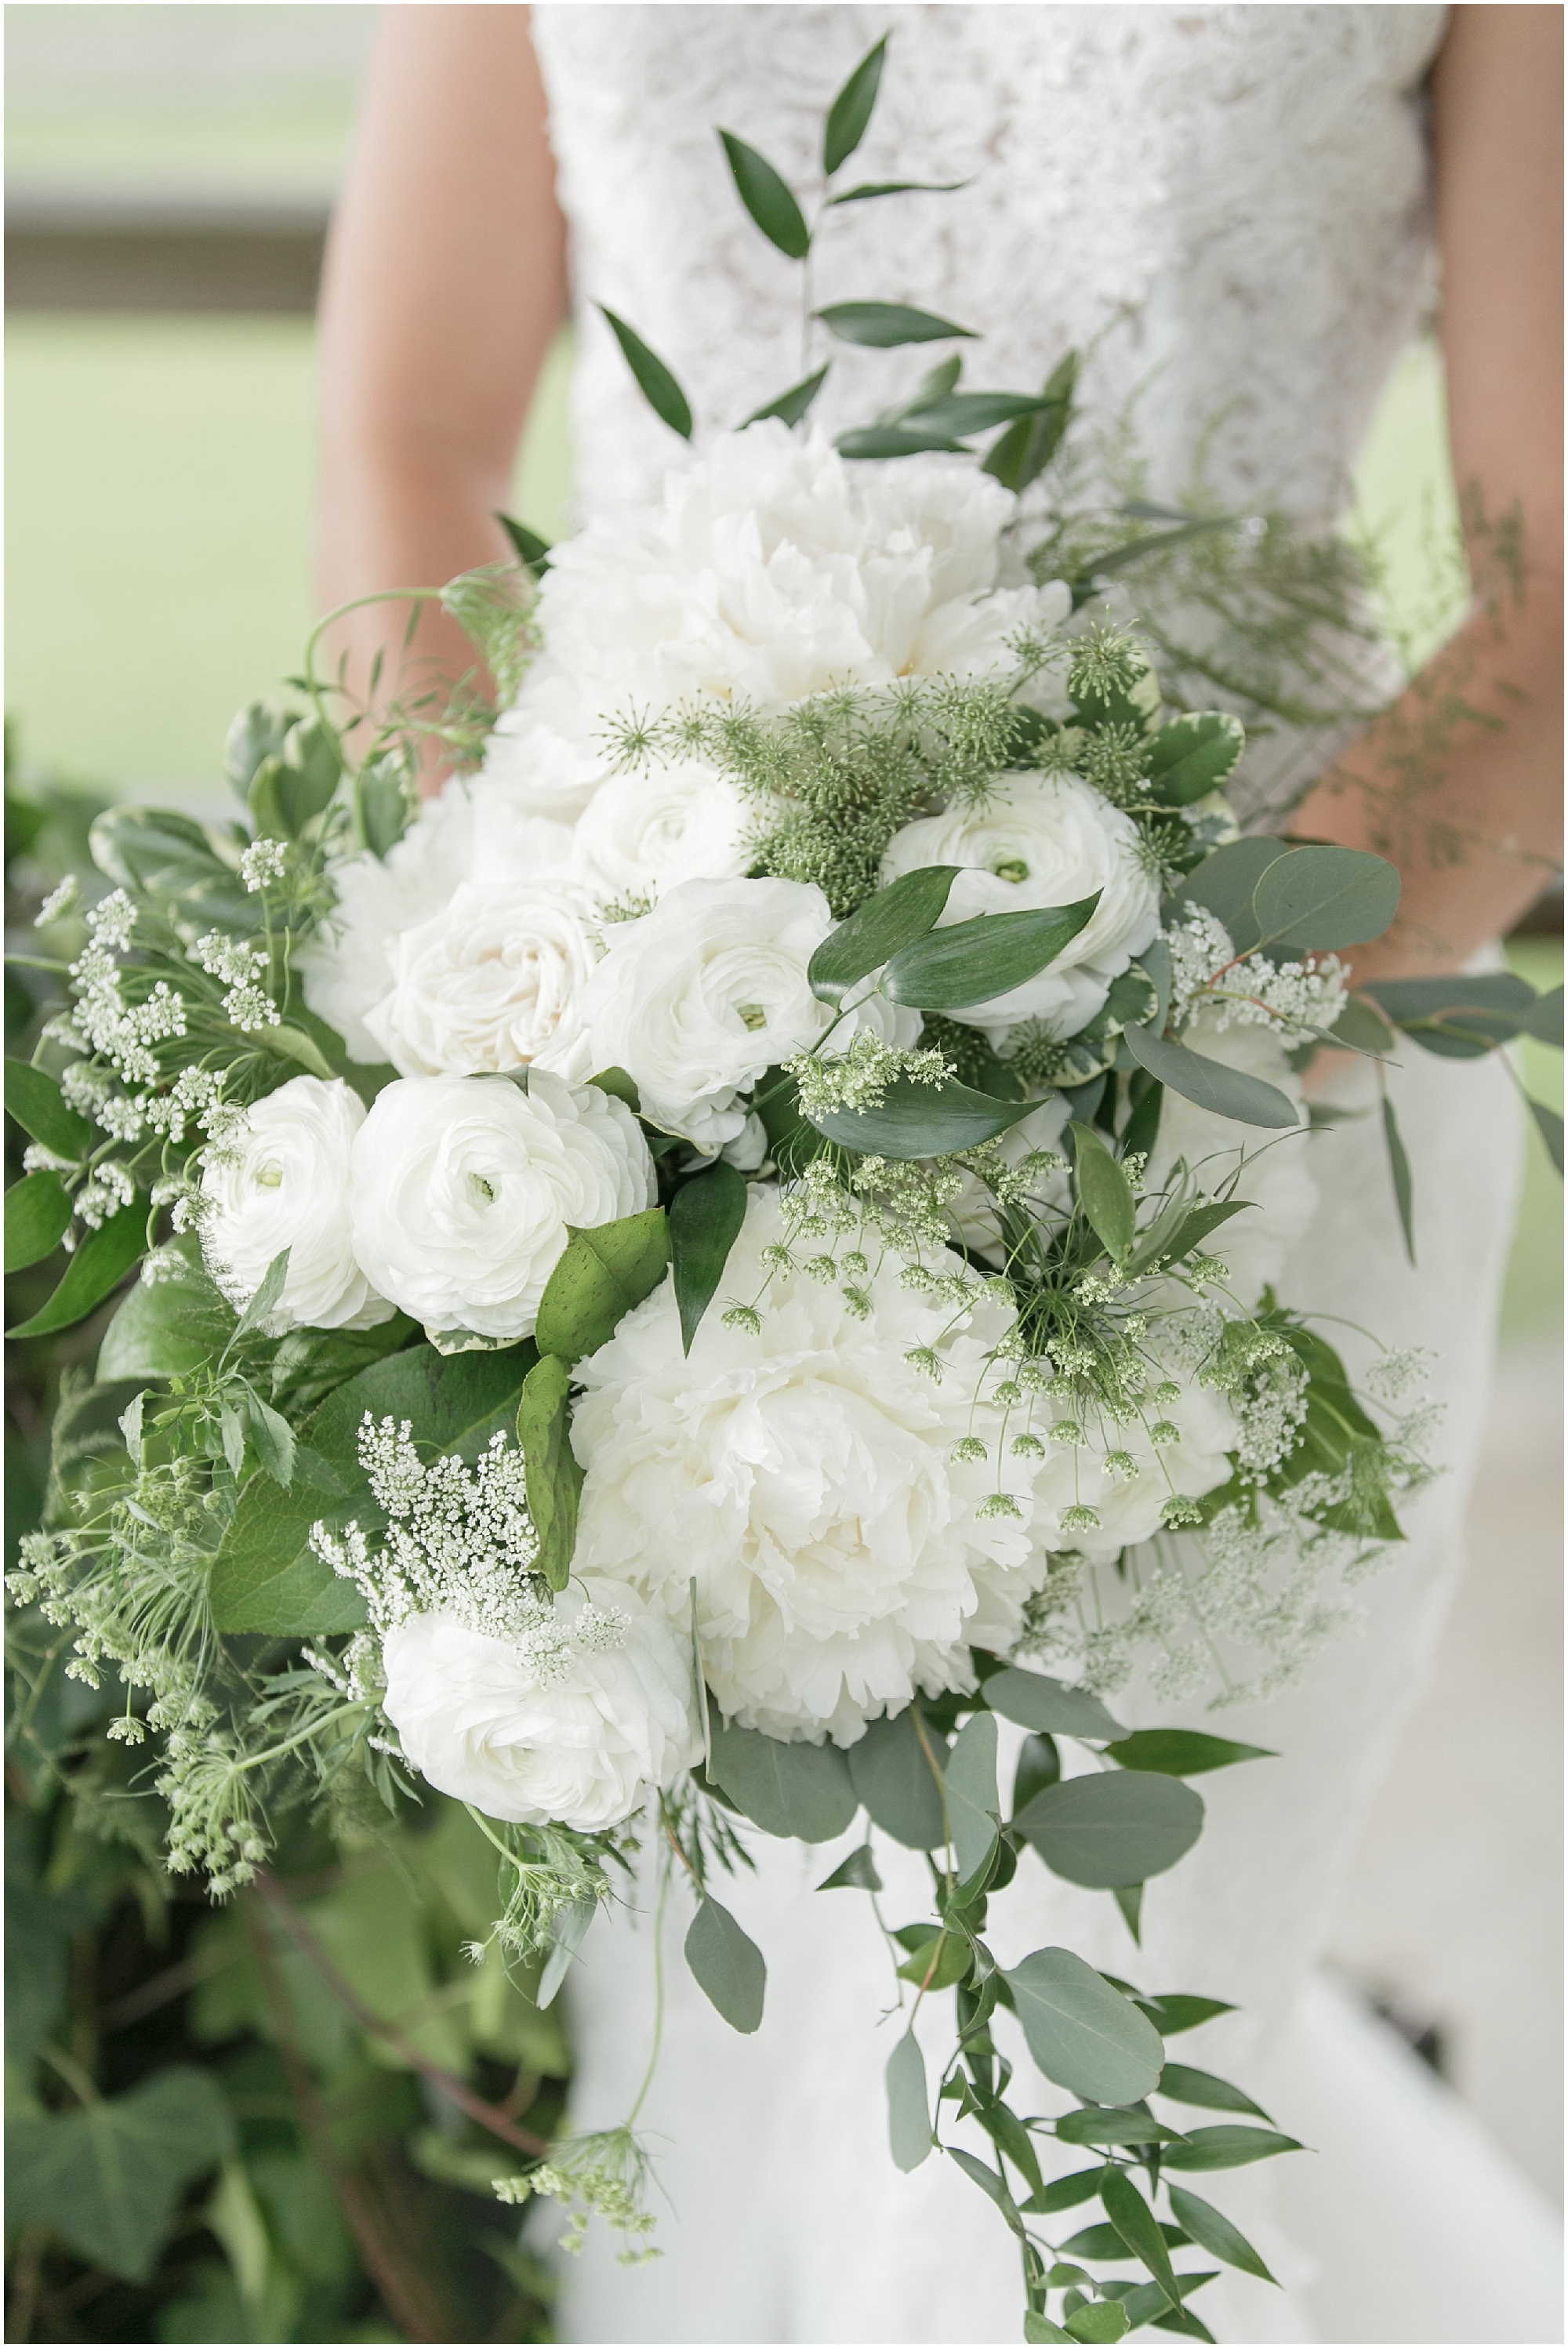 Bride's white and green floral bouquet.